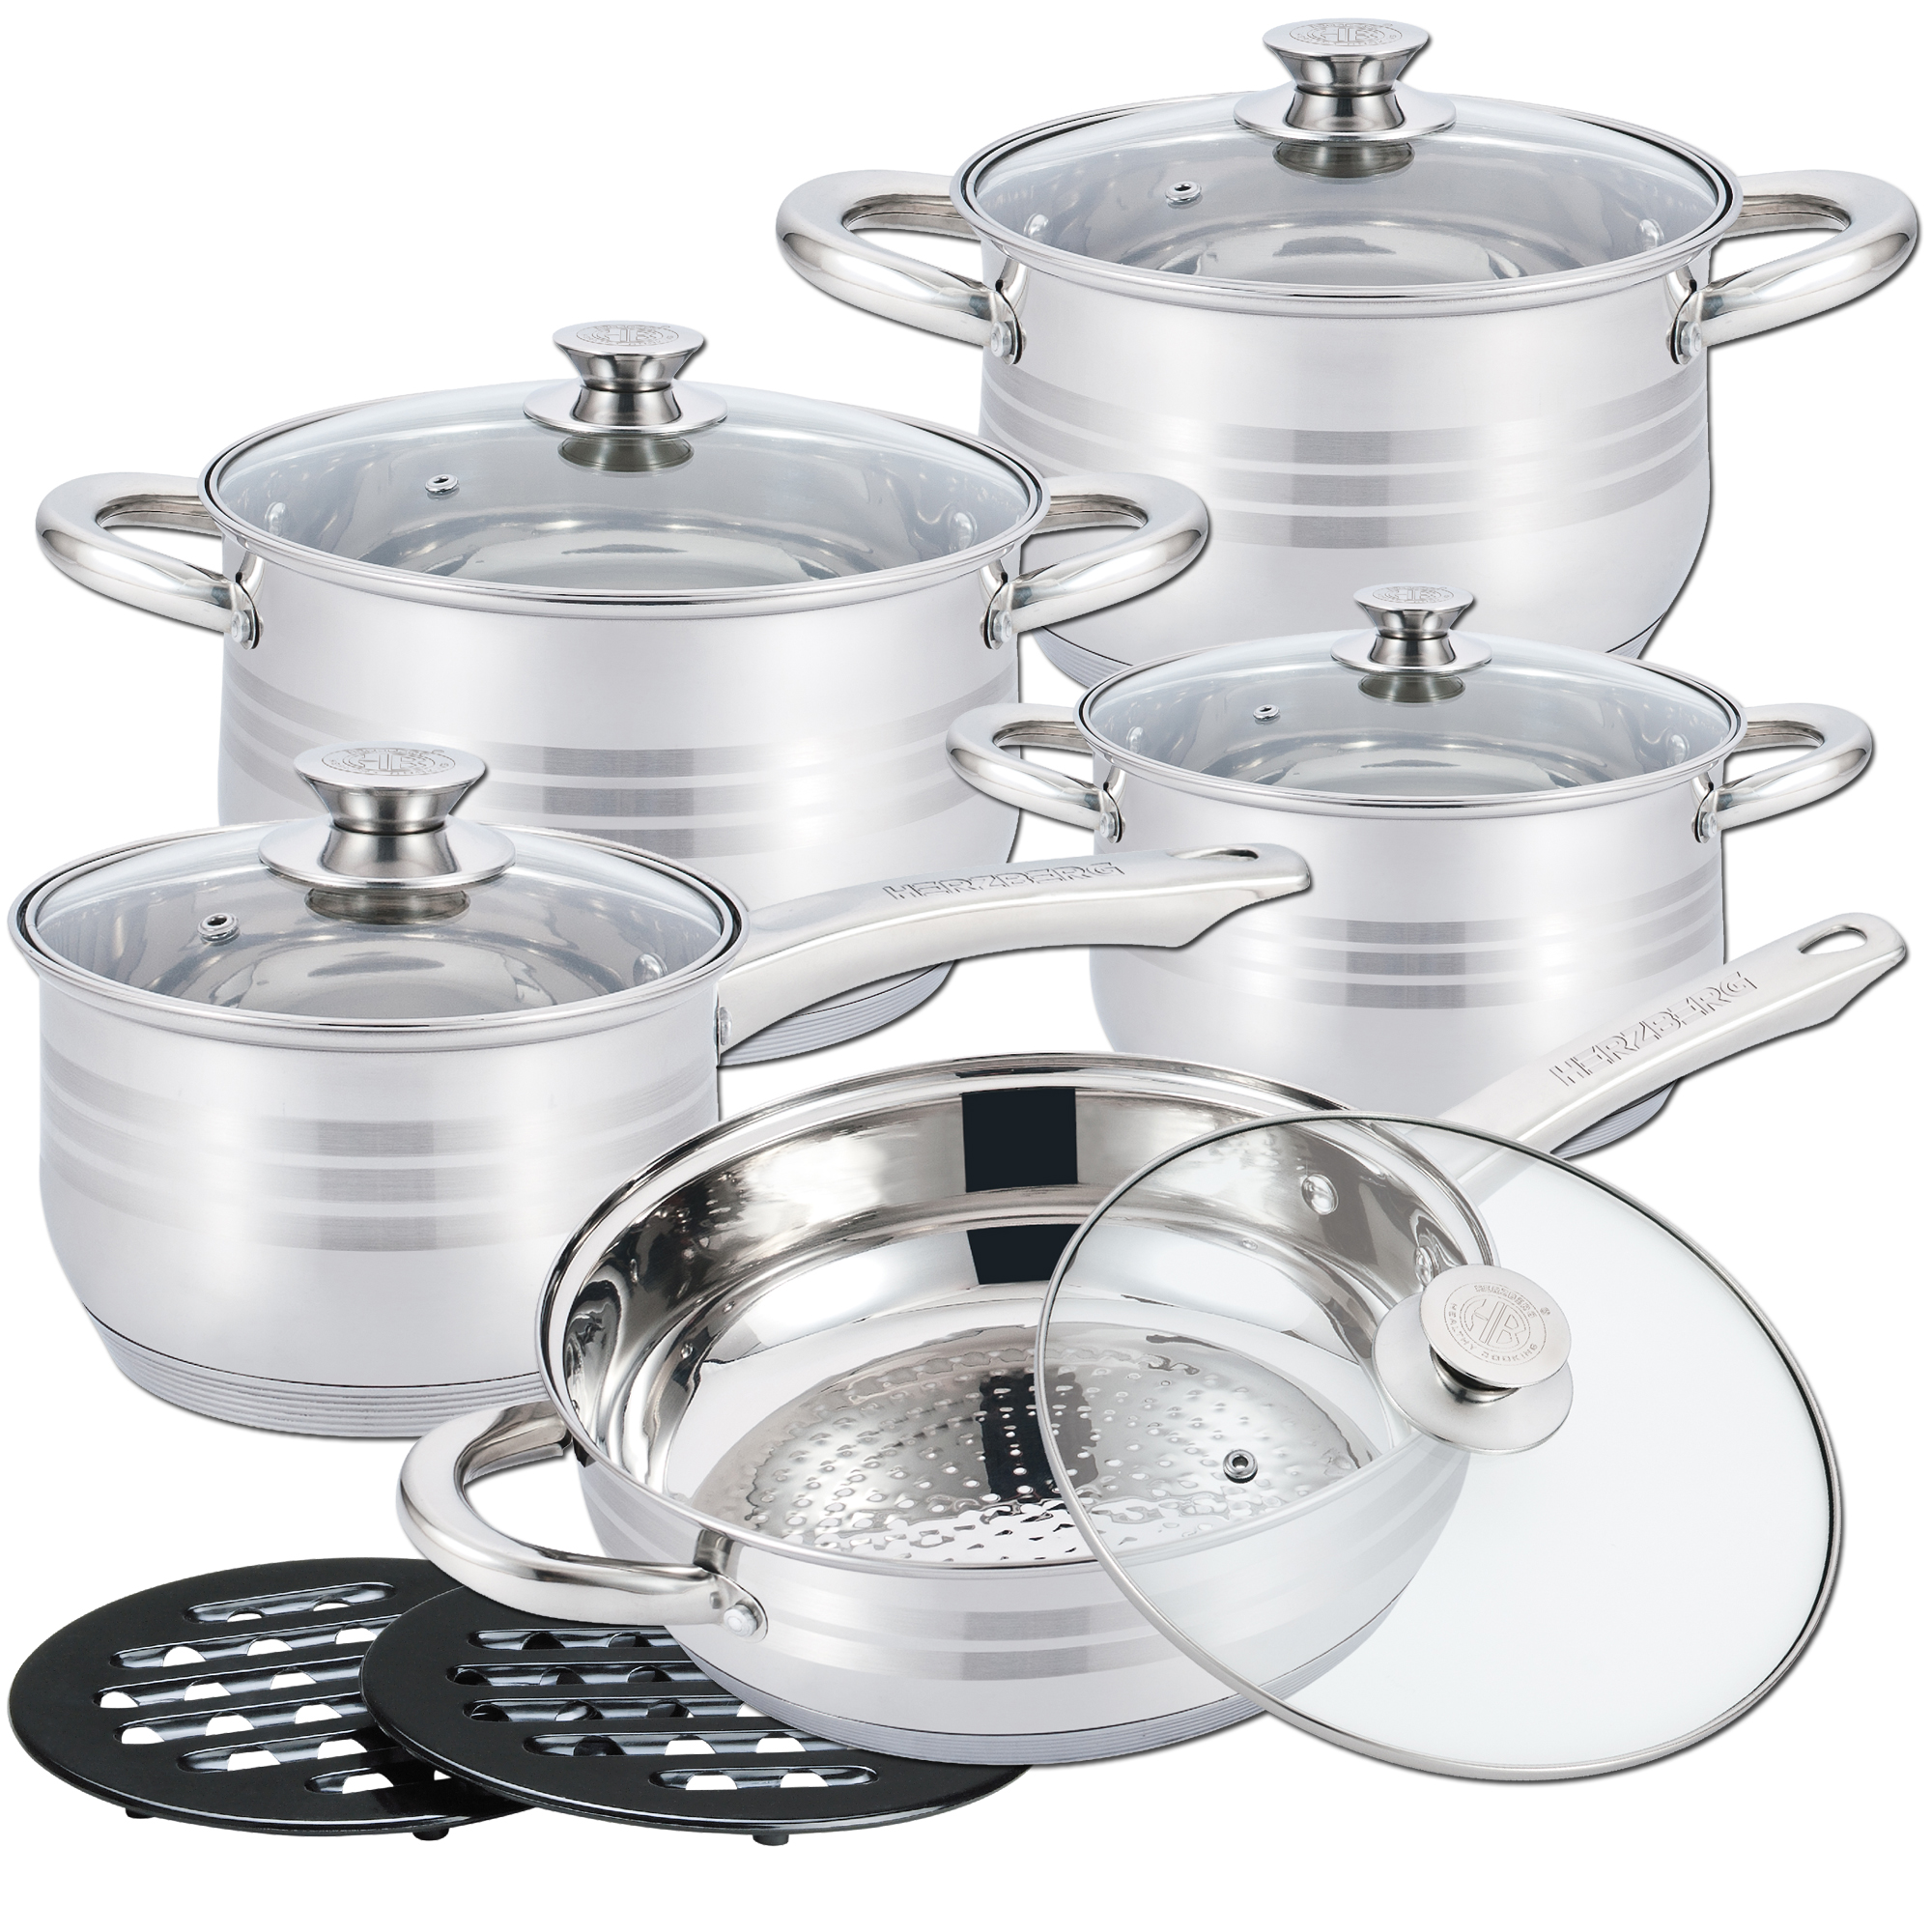 Bialetti Trudi Evolution Pots and Pans Brand New Stock, Kitchenware, Official archives of Merkandi